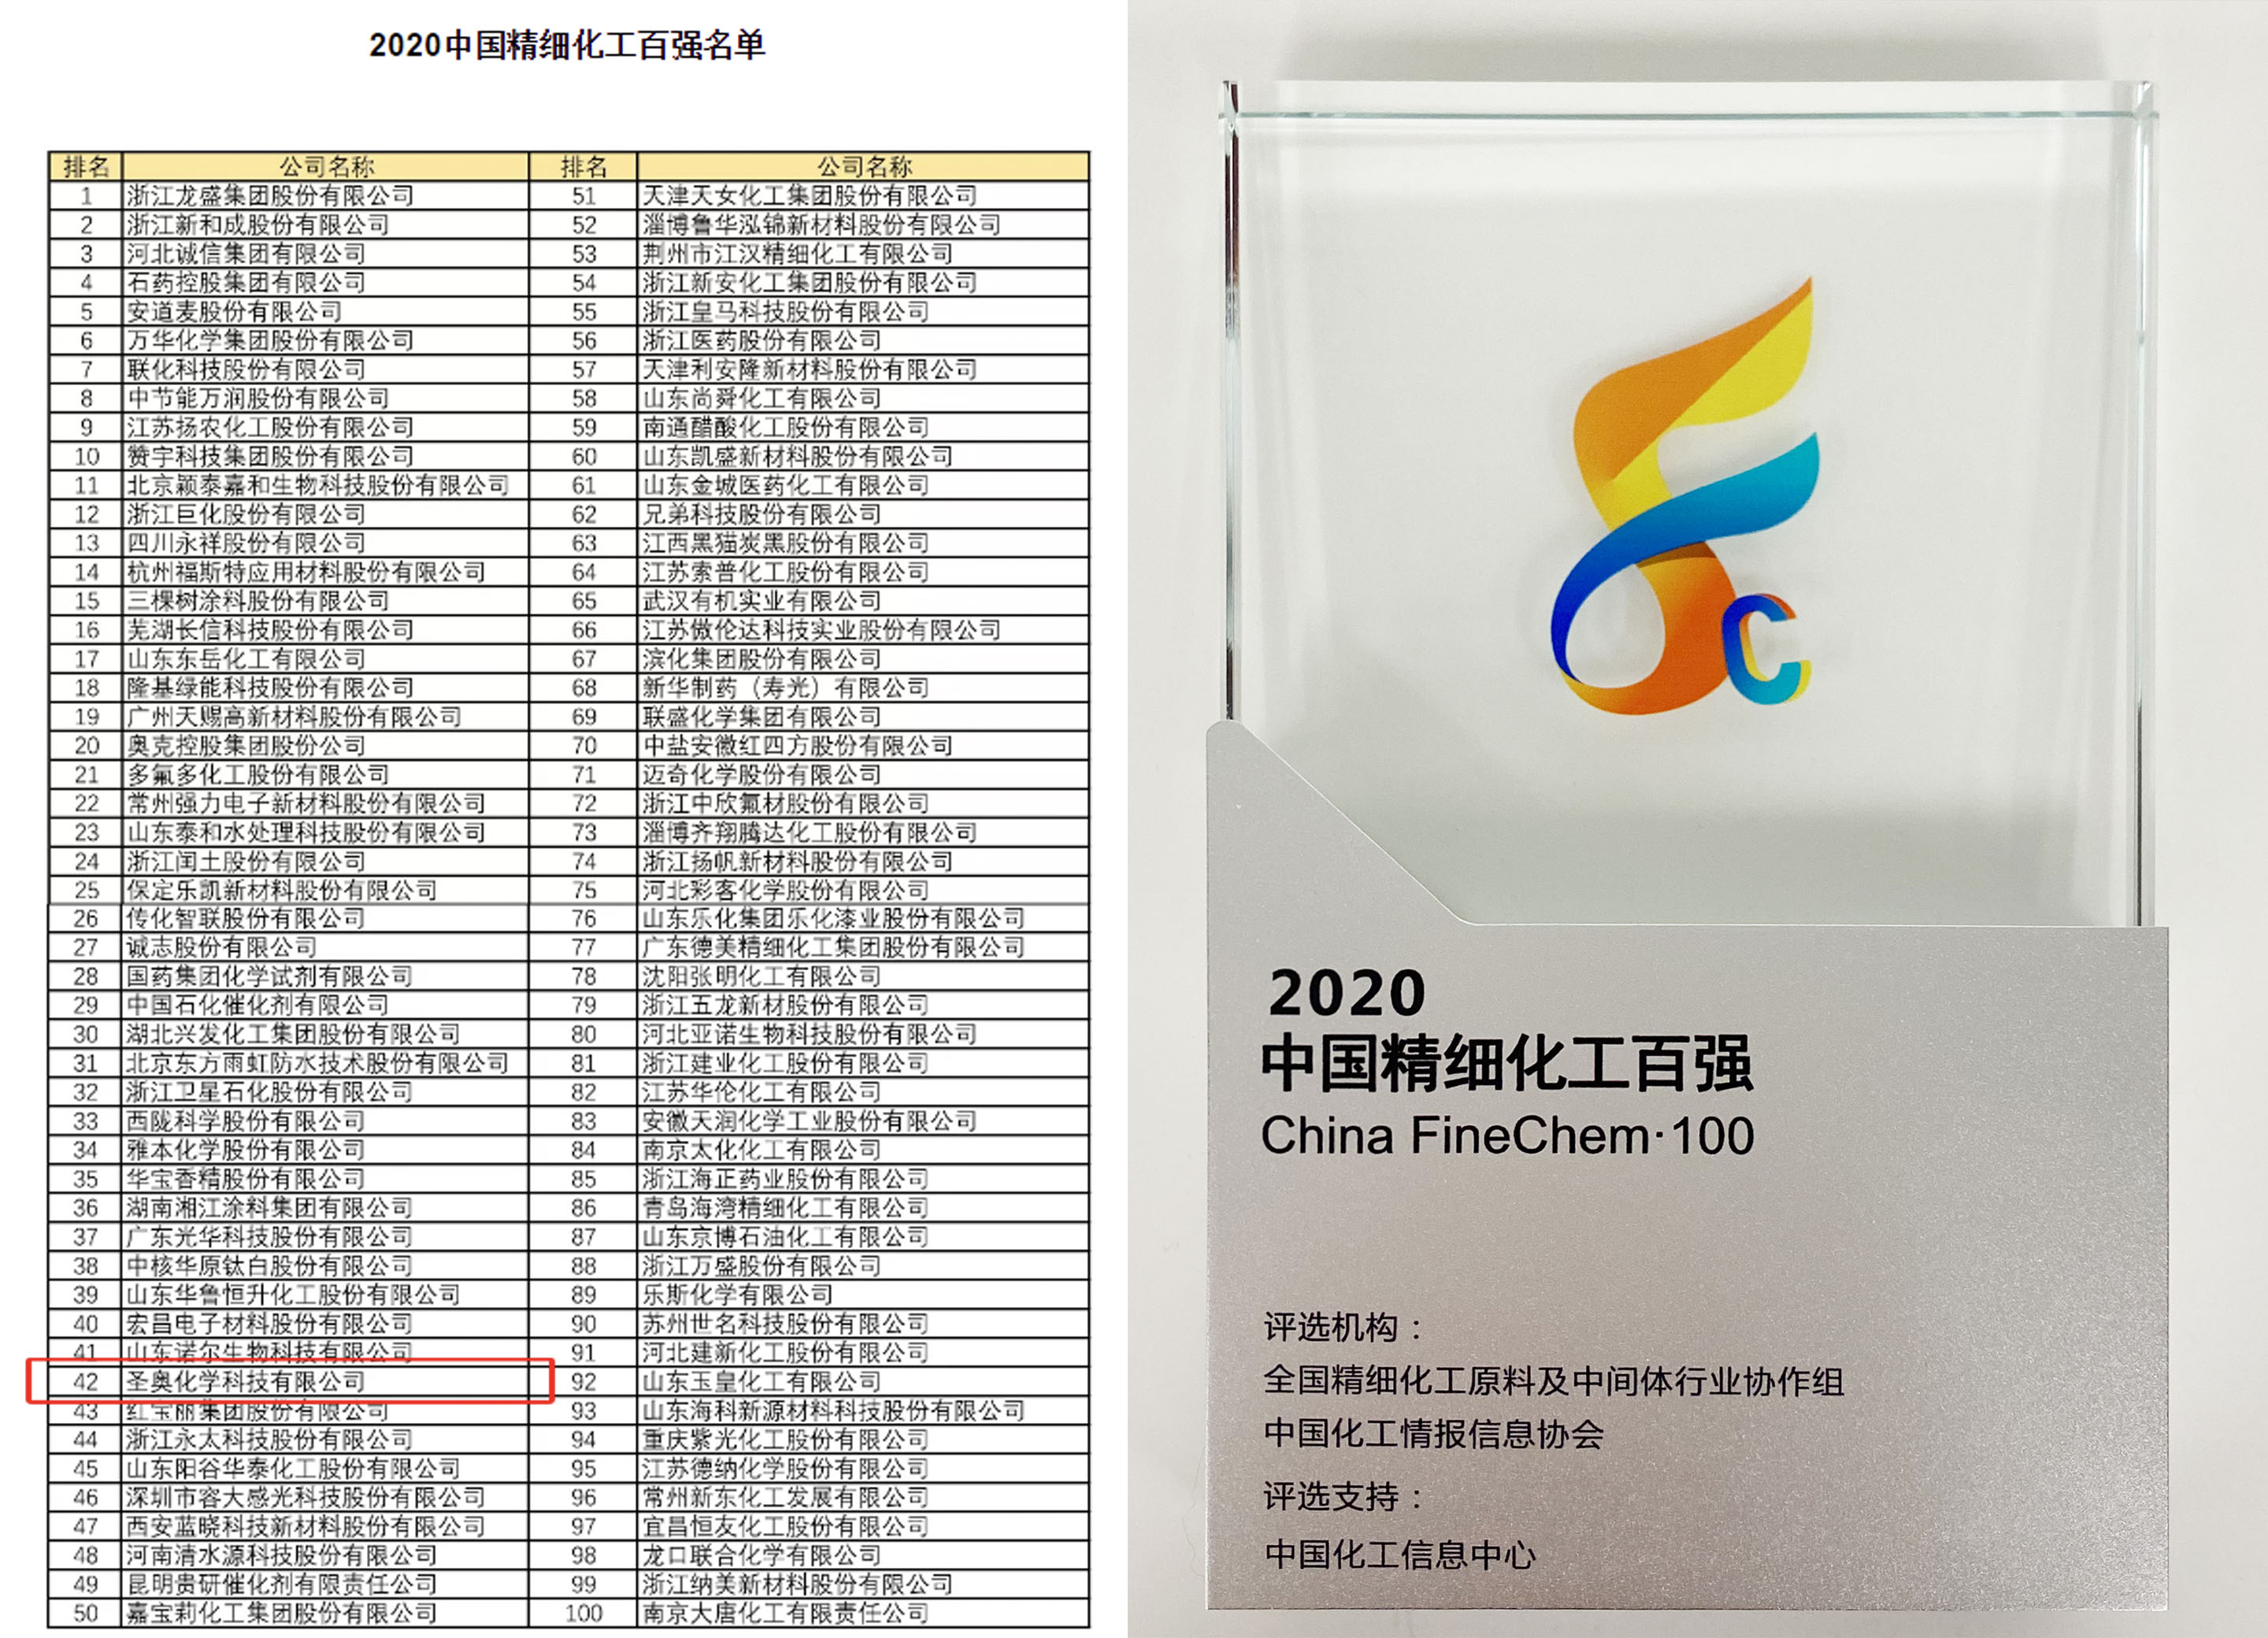 Sennics made the list of China's Top 100 Fine Chemical Companies in 2020 again 